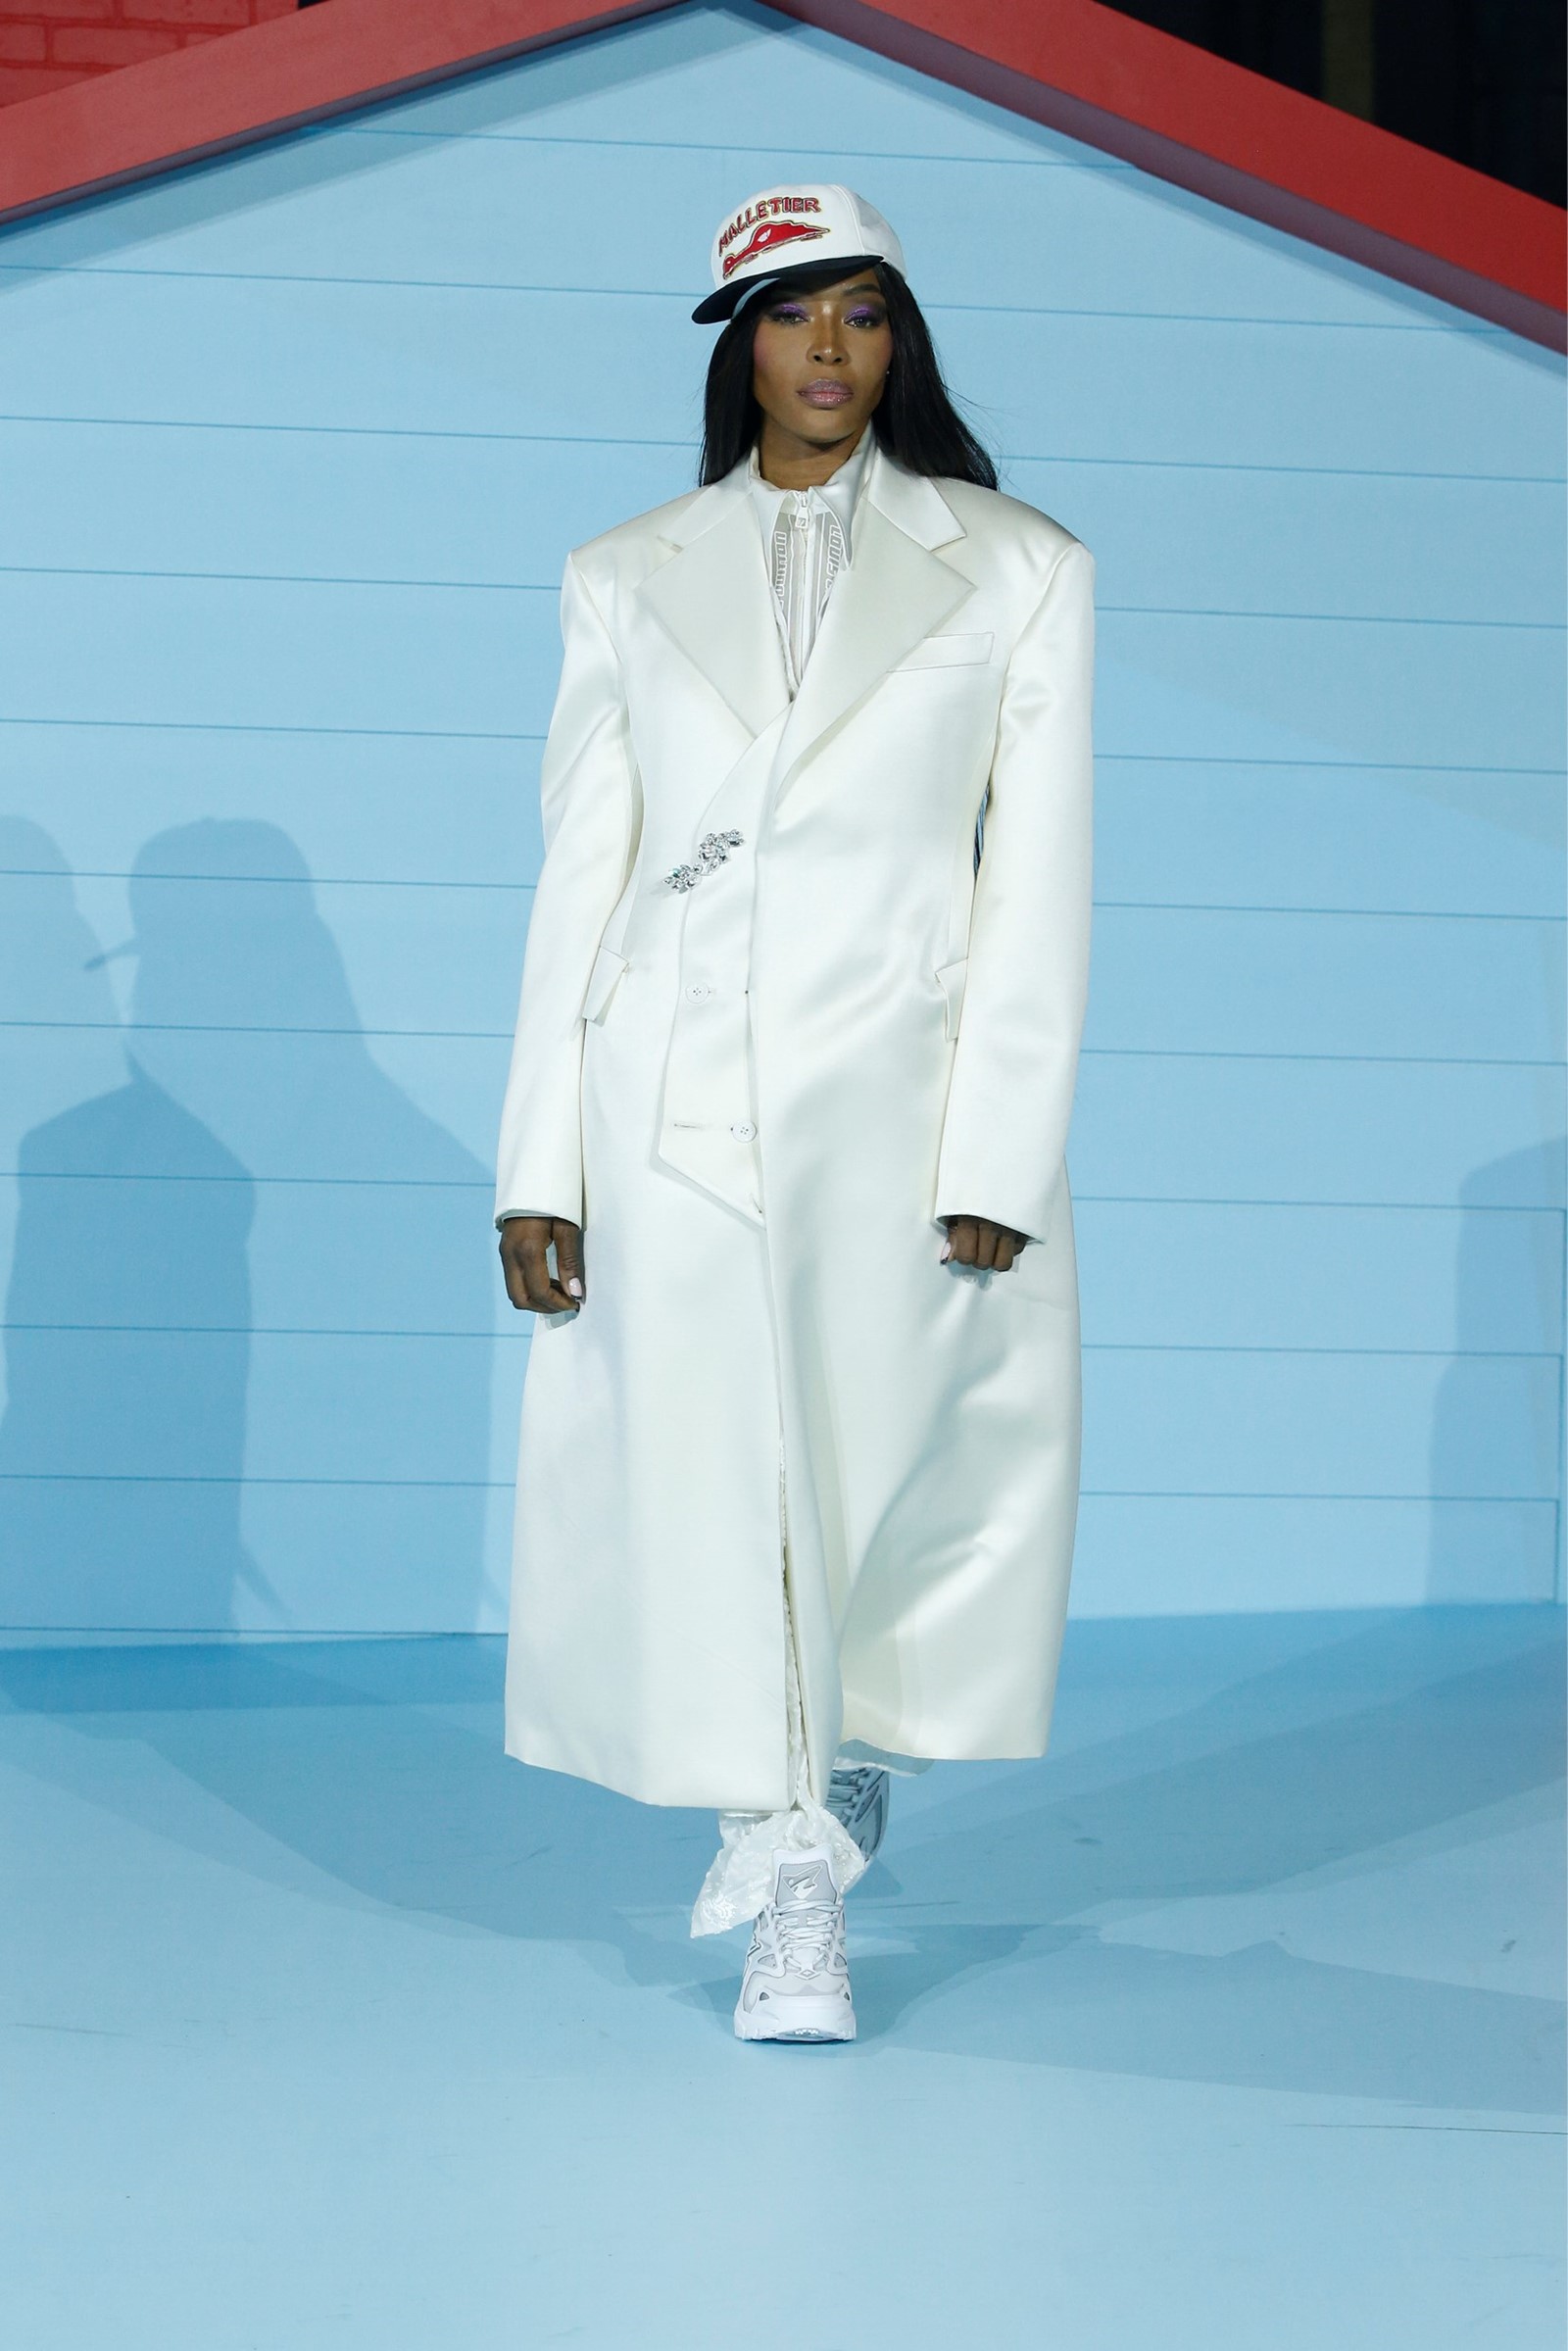 Louis Vuitton's Loving Tribute to the Soaring Vision of Virgil